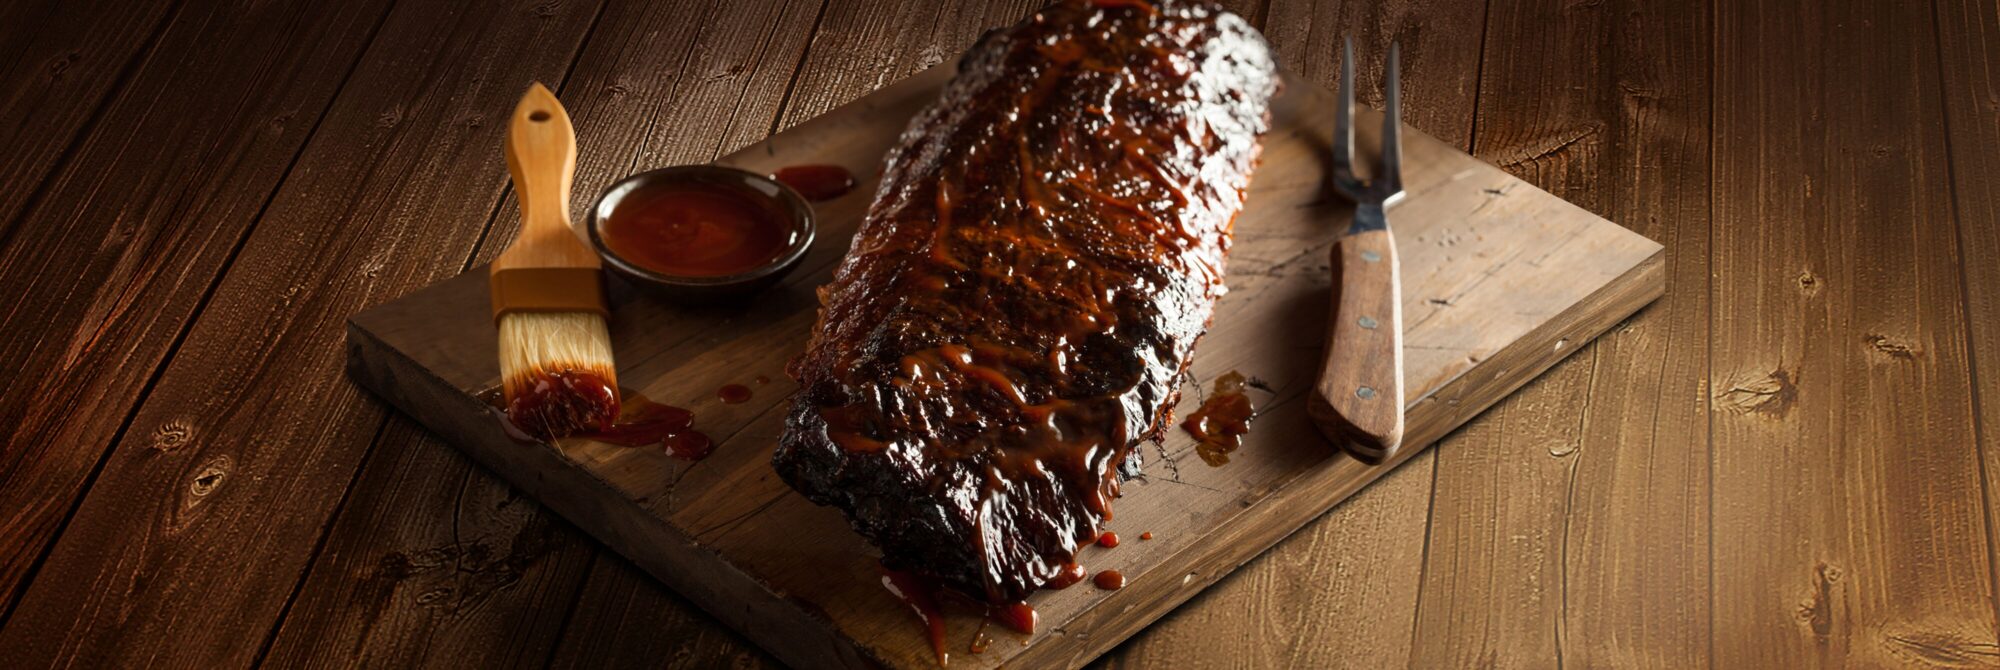 BBQ Sauced Baby Back Ribs